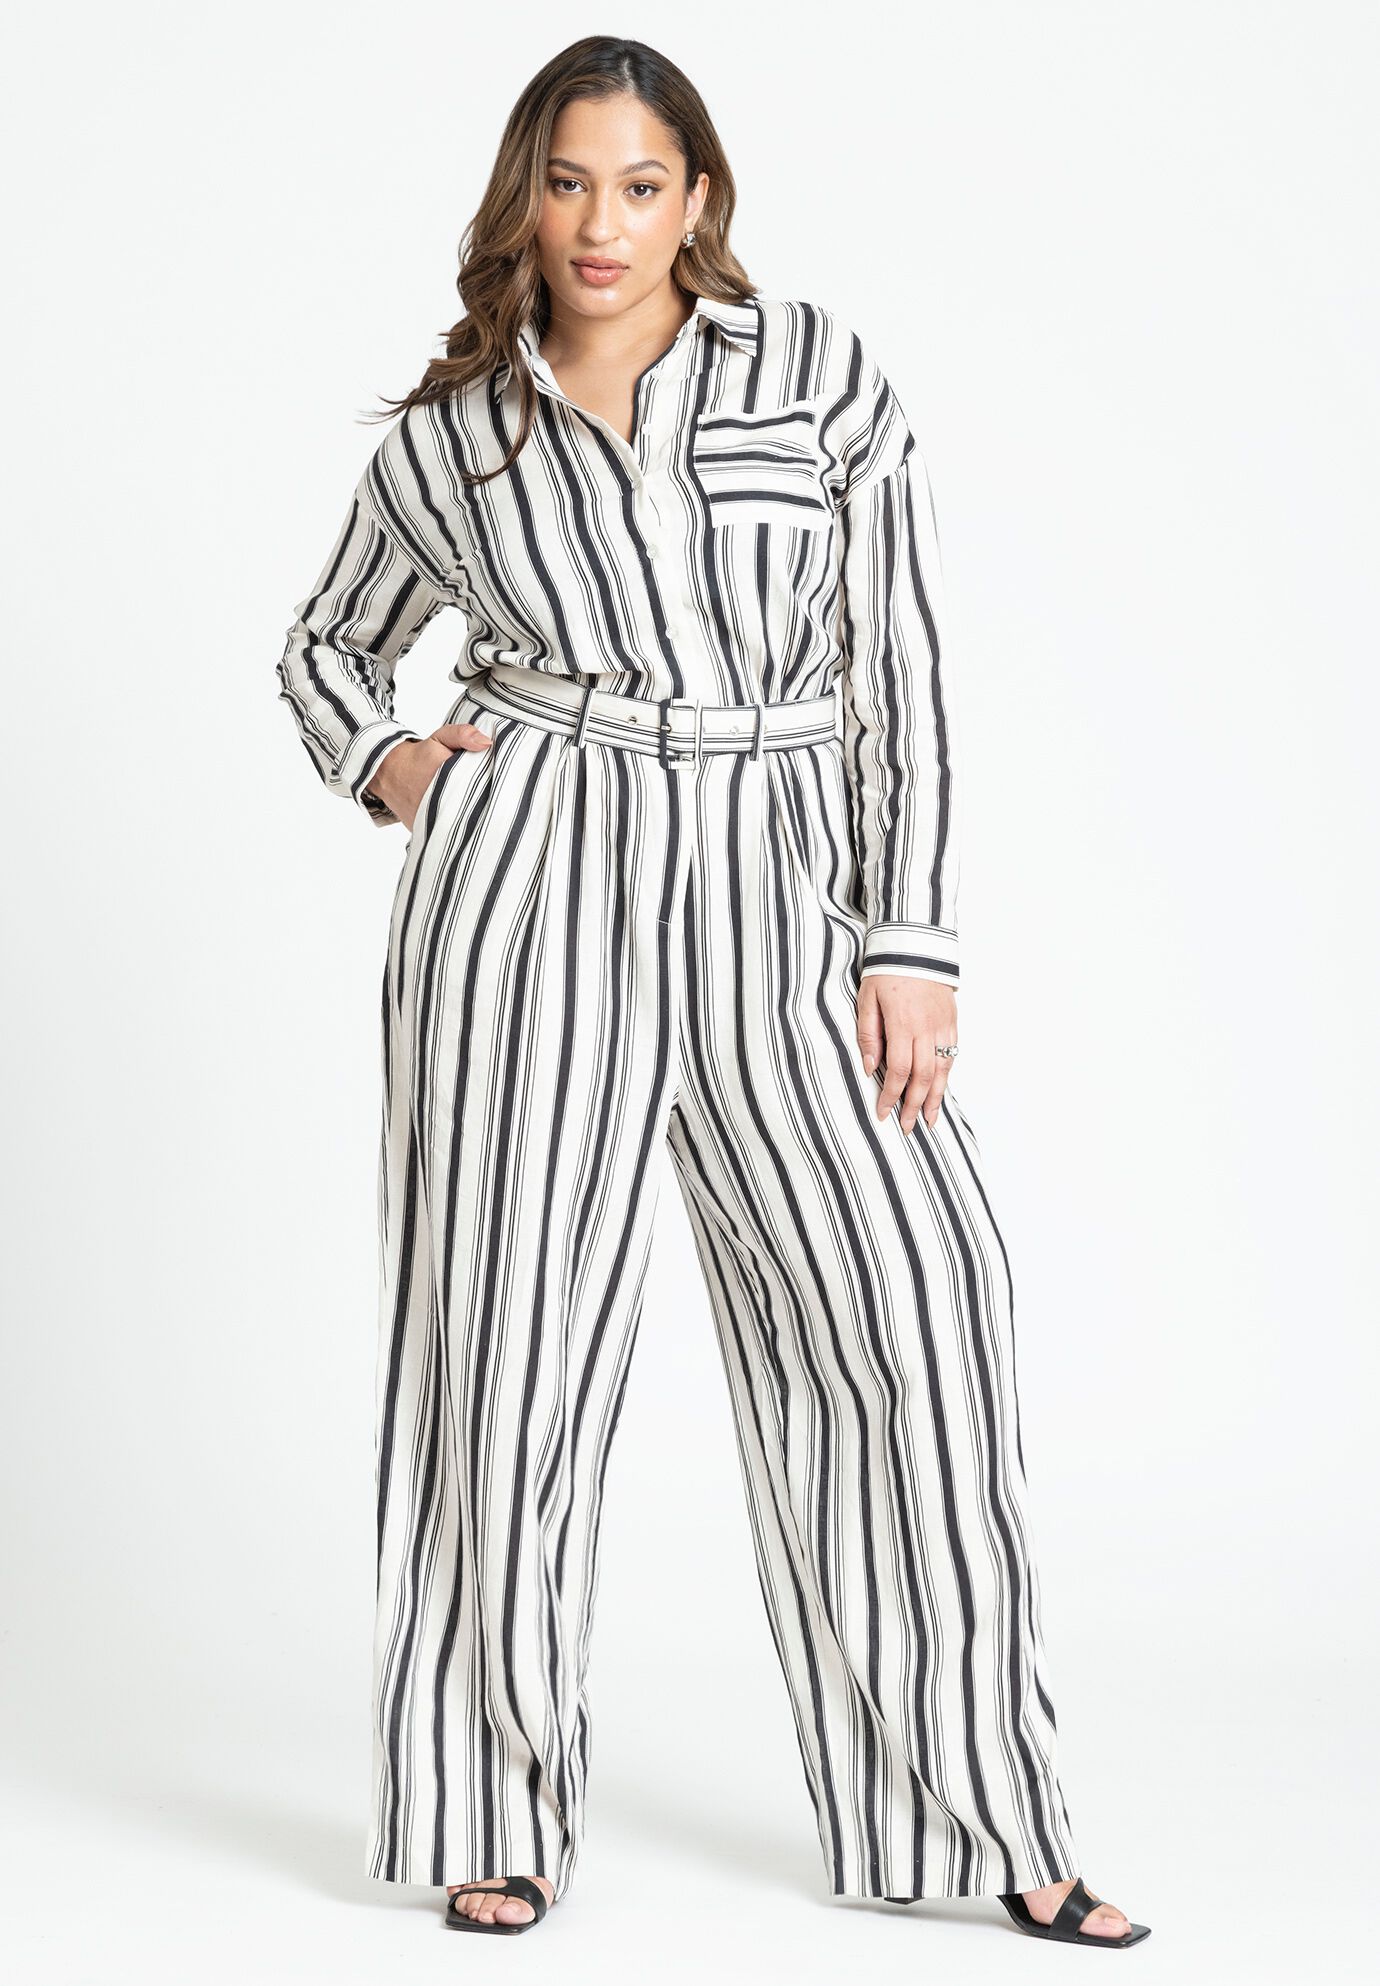 Plus Size Striped Print Collared Belted Pocketed Pleated Floor Length Long Sleeves Dropped Shoulder Jumpsuit